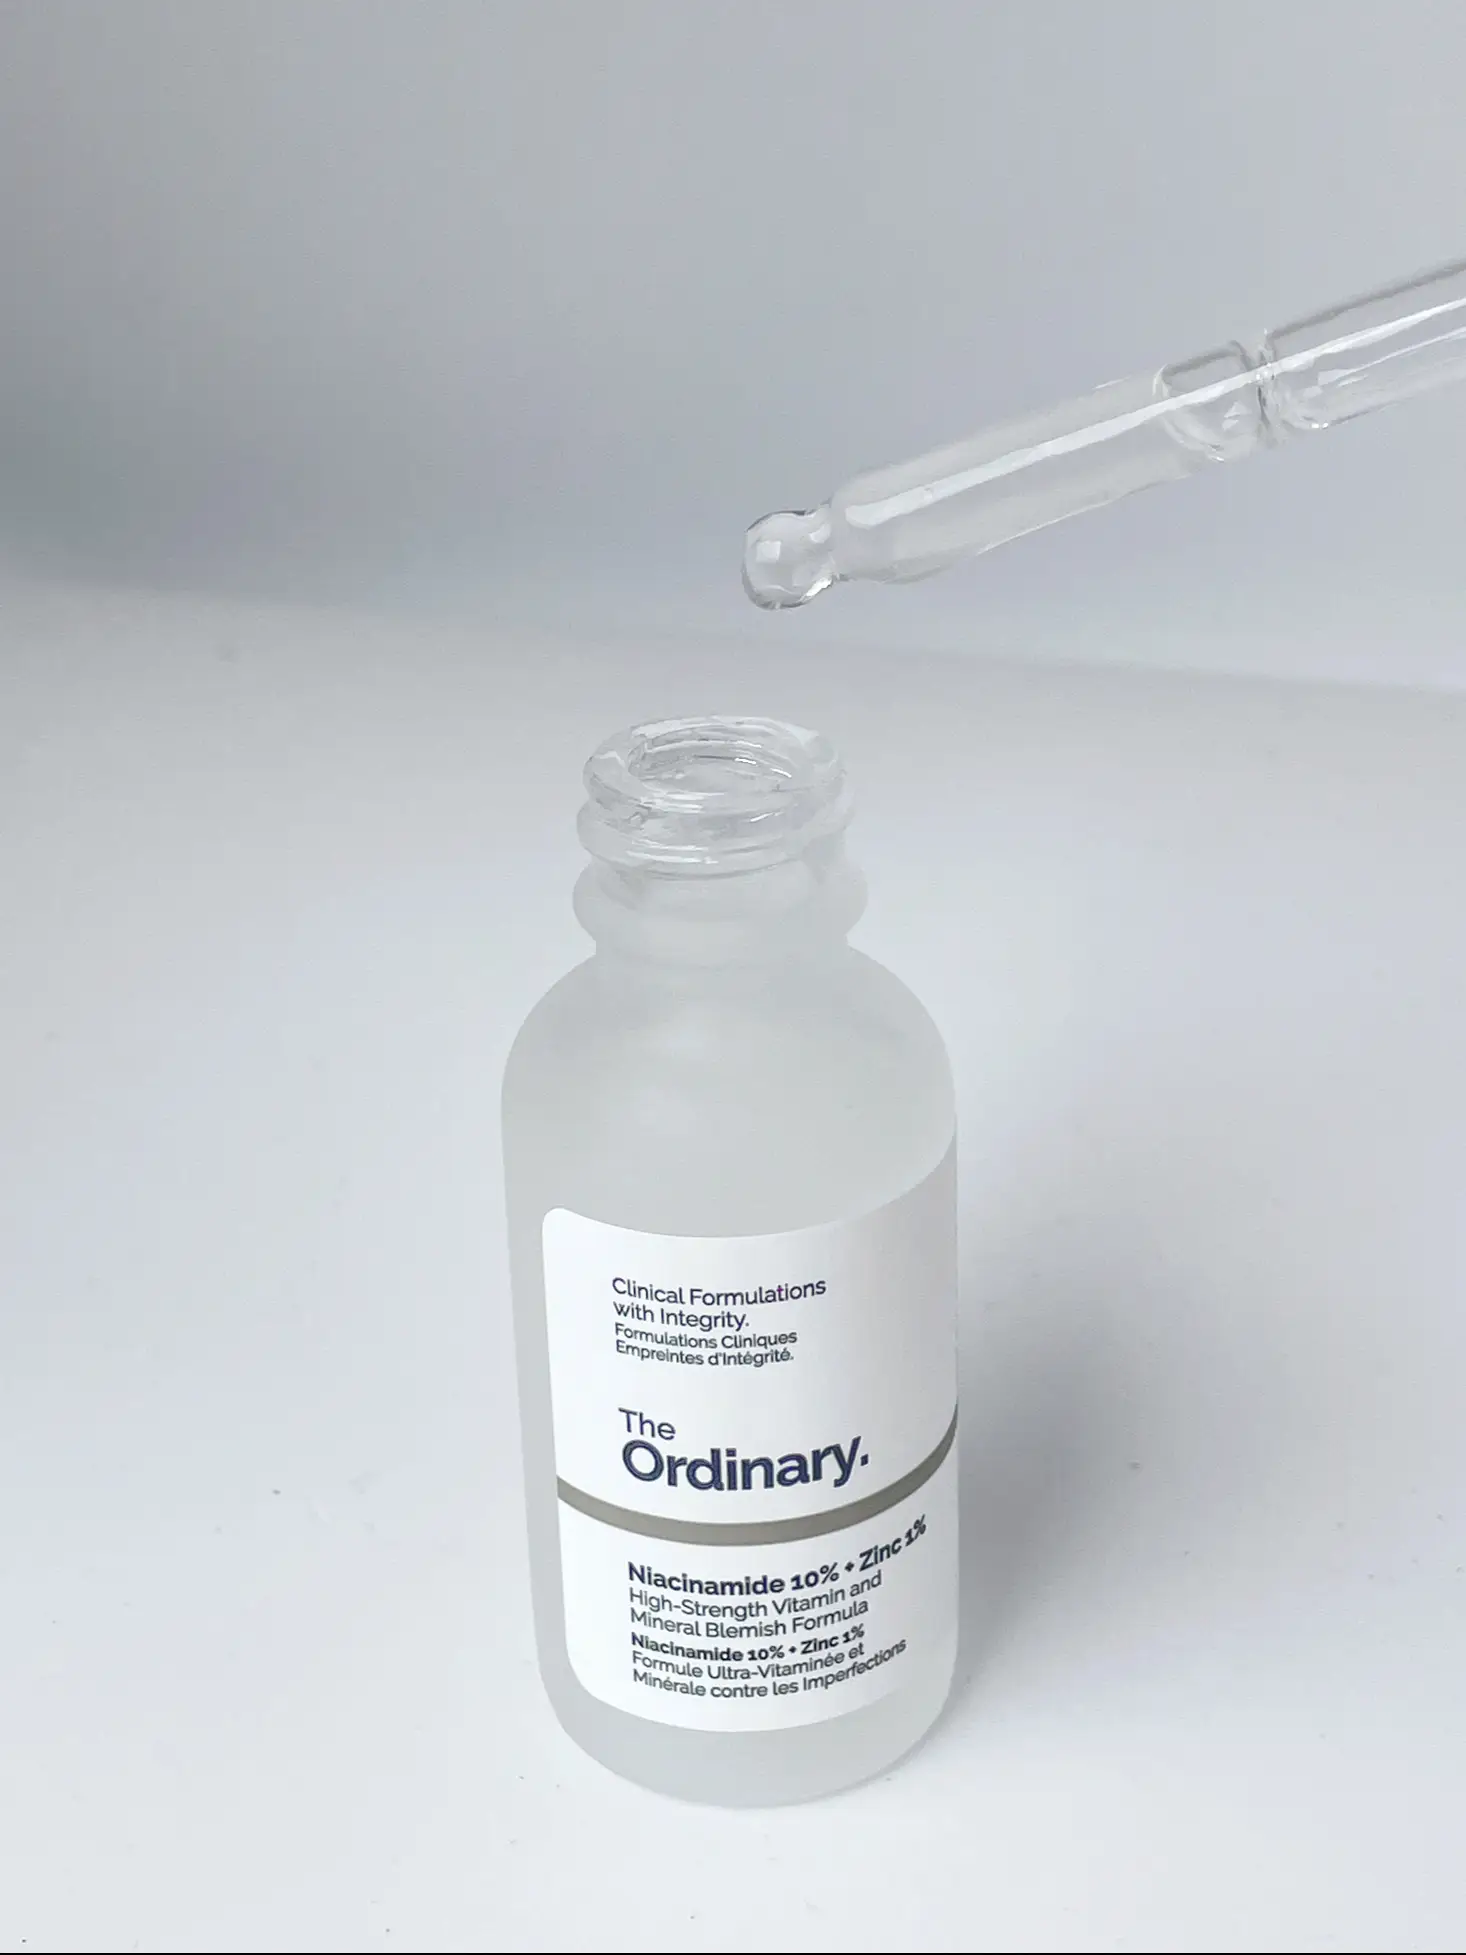 Niacinamide & The Ordinary Review 's images(1)